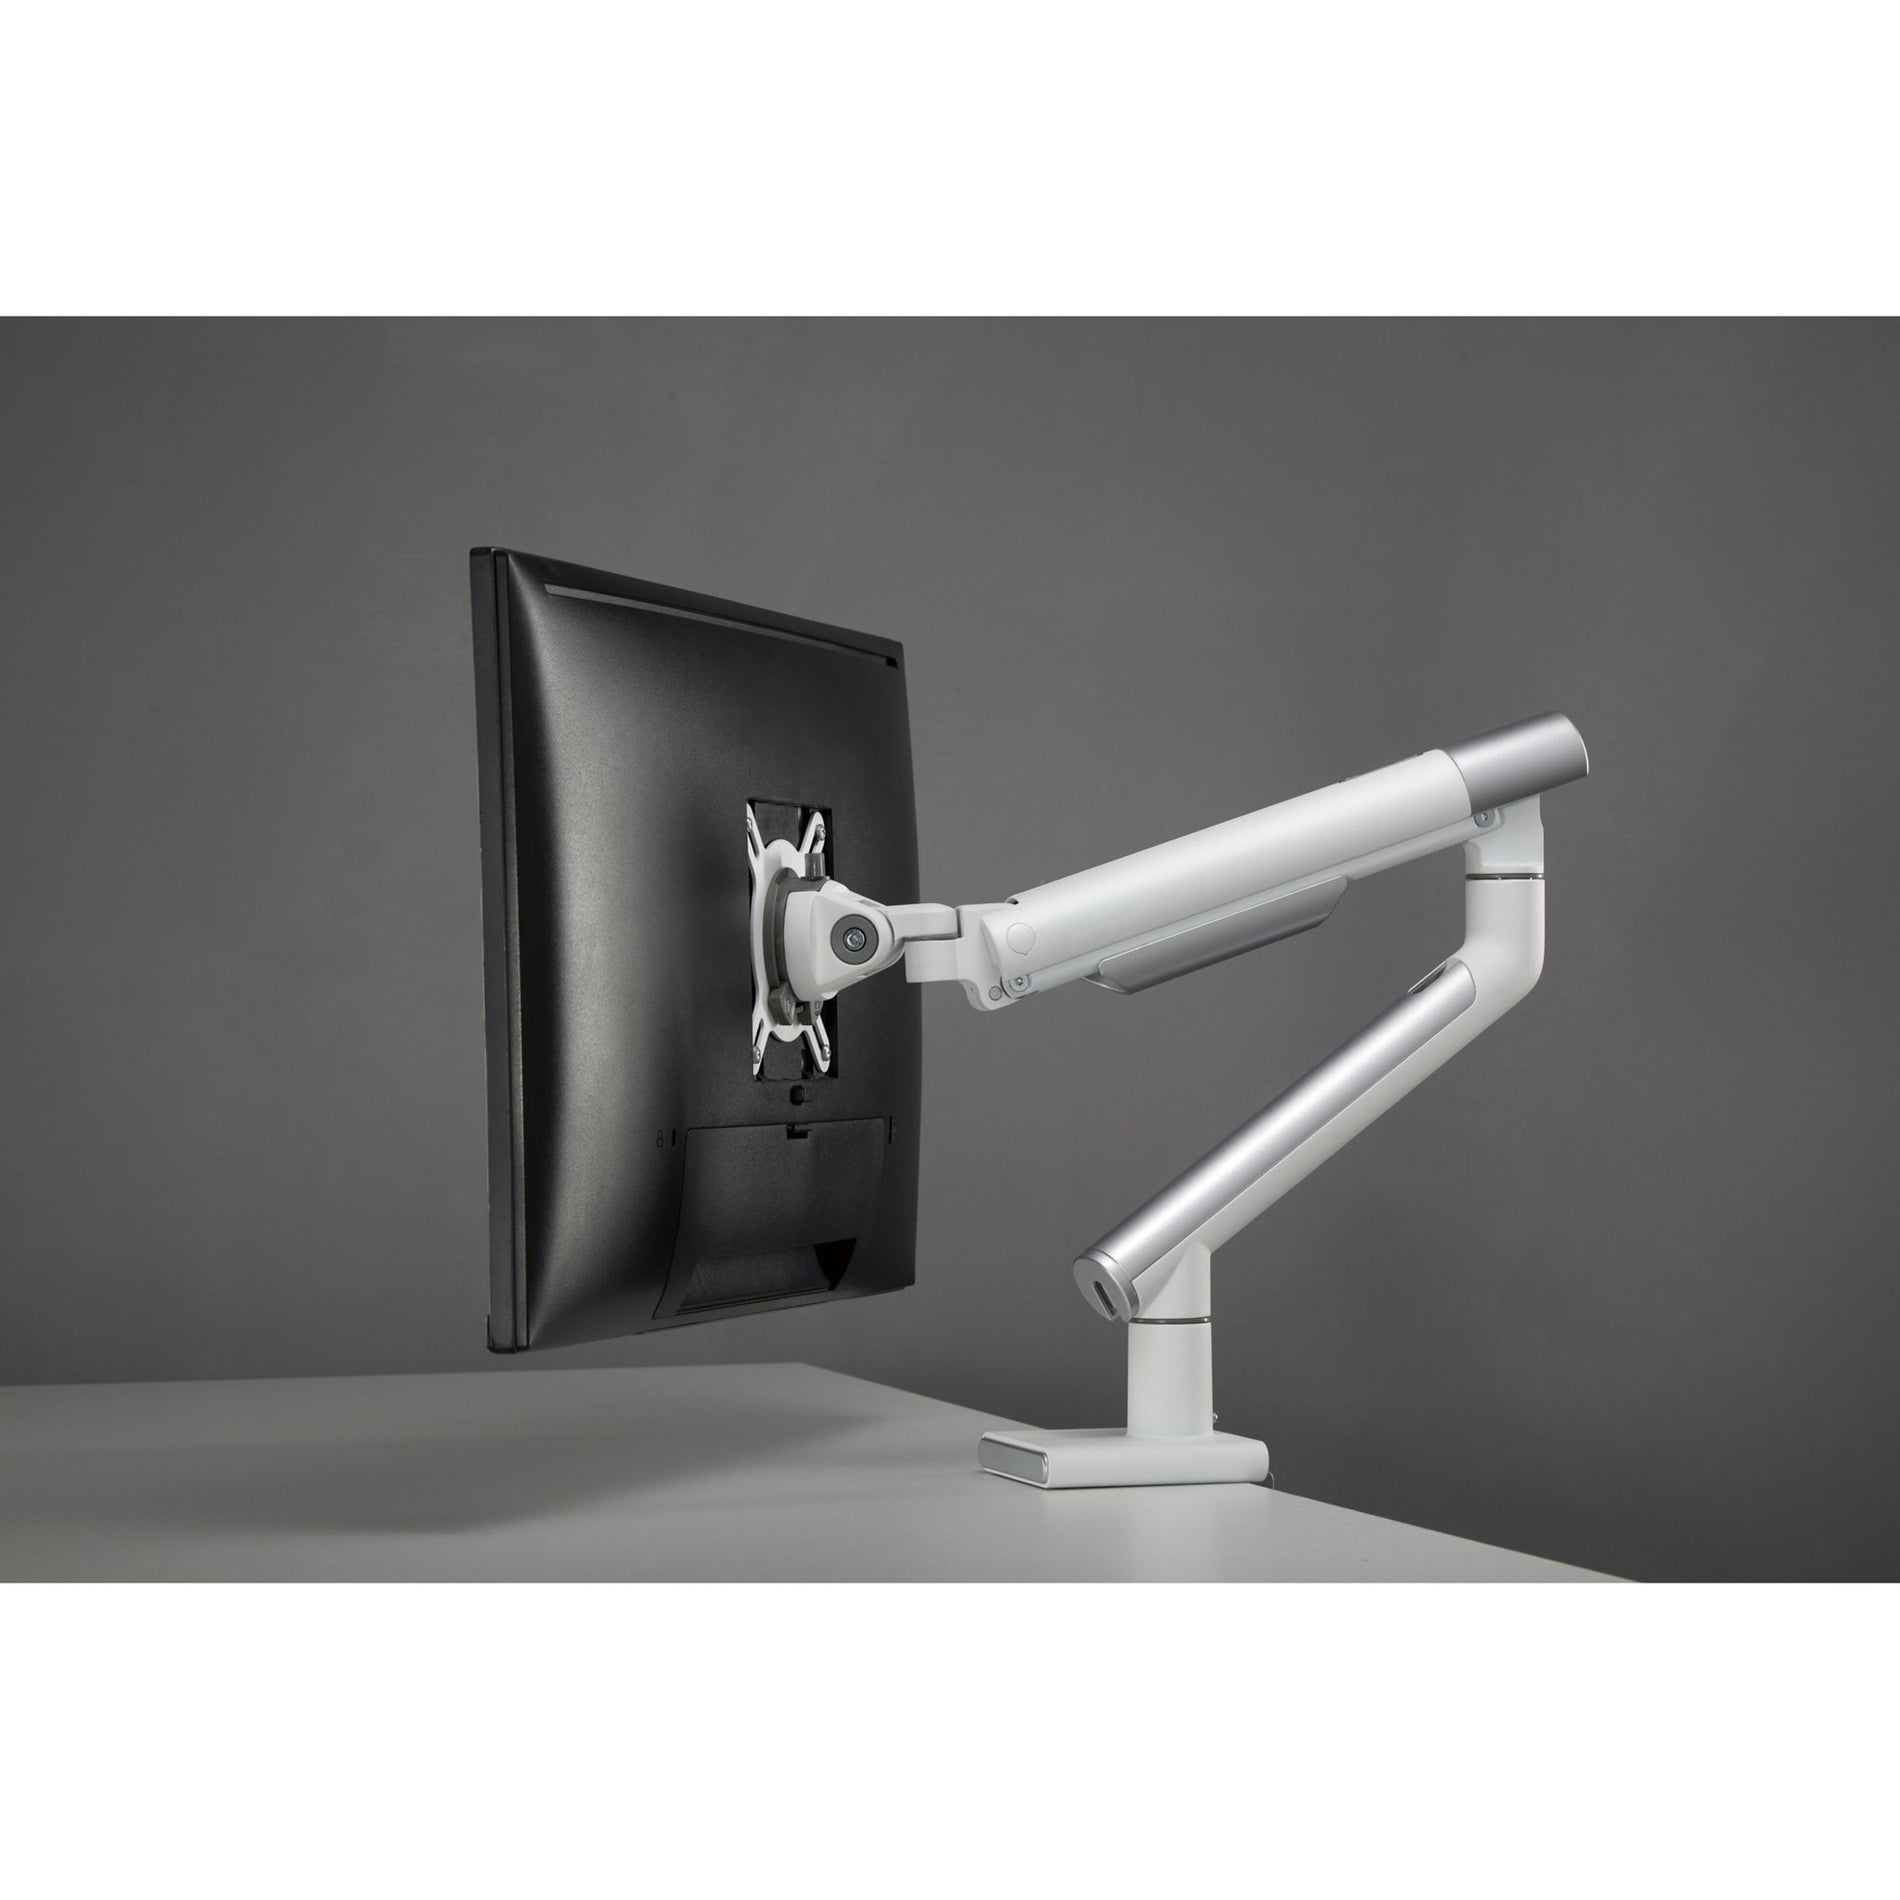 Amer HYDRA1A Single Monitor Mount with Articulating Arm [Arctic Edition], Extendable Arm, 180° Rotation, Space Gray